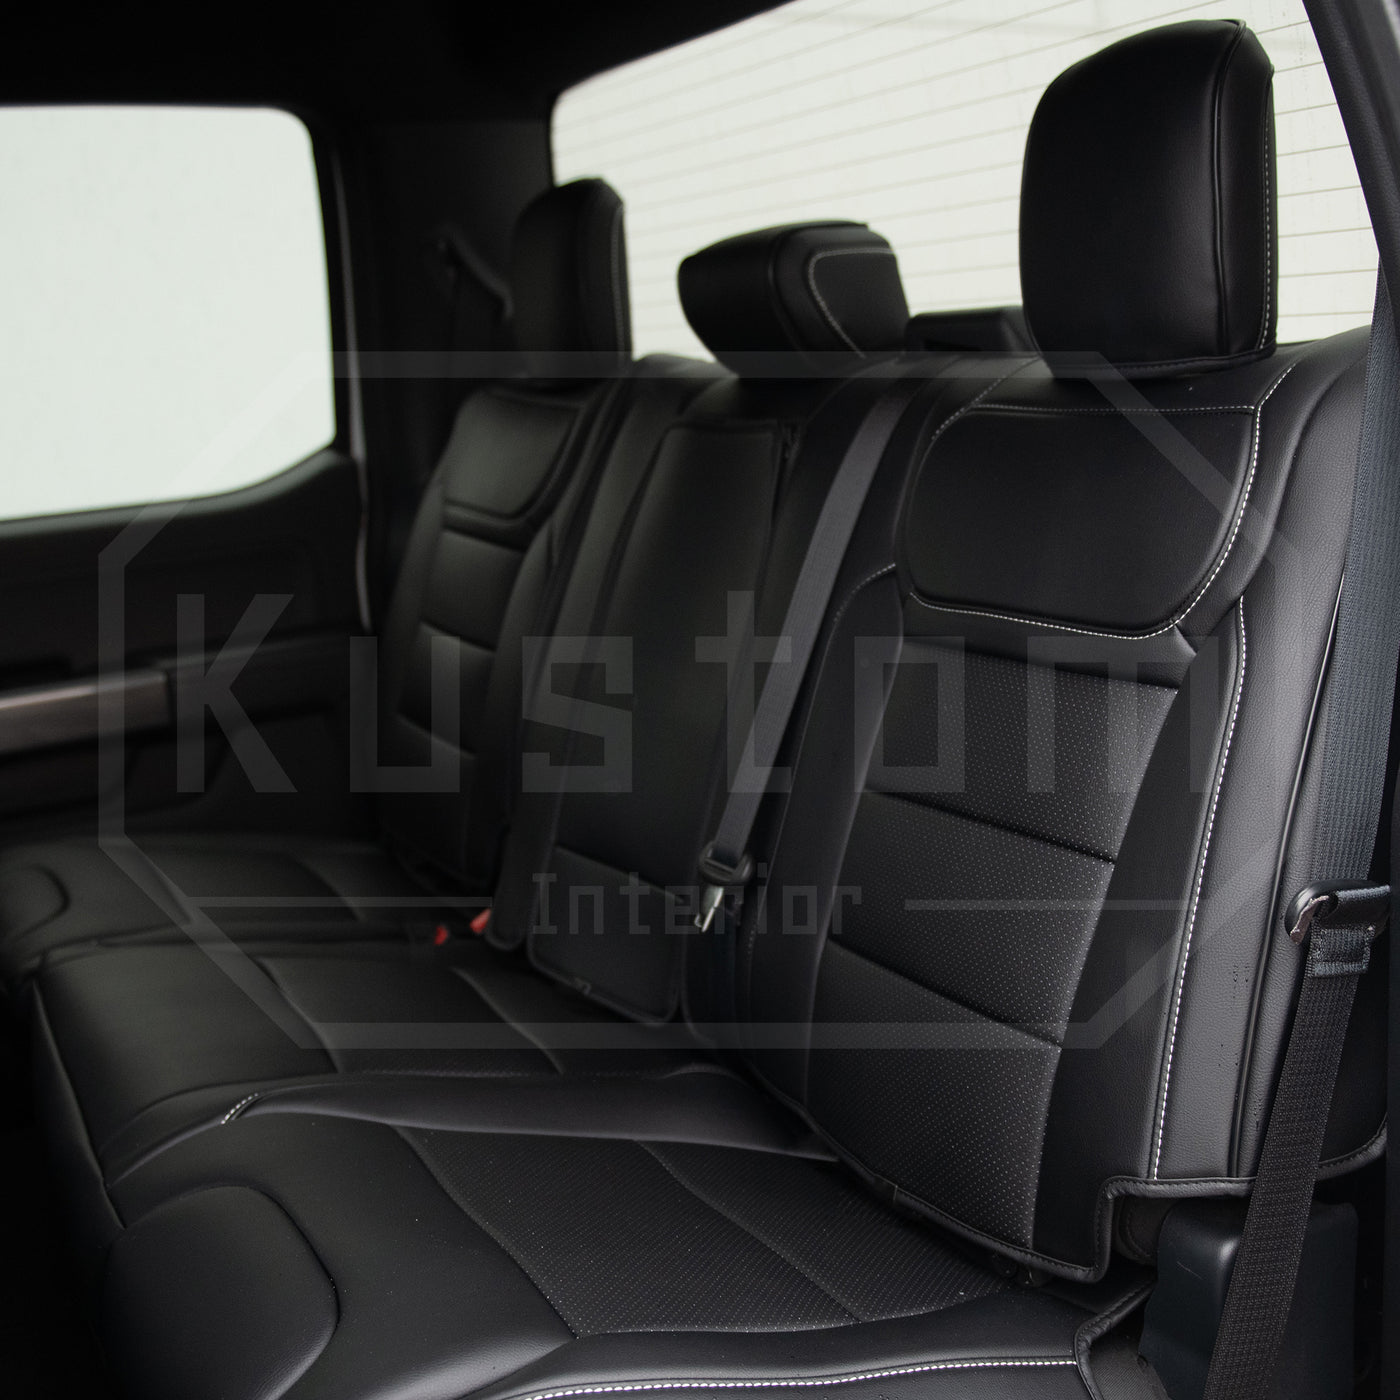 2021-Up Ford F-150 / Raptor Premium Custom Leather Seat Covers